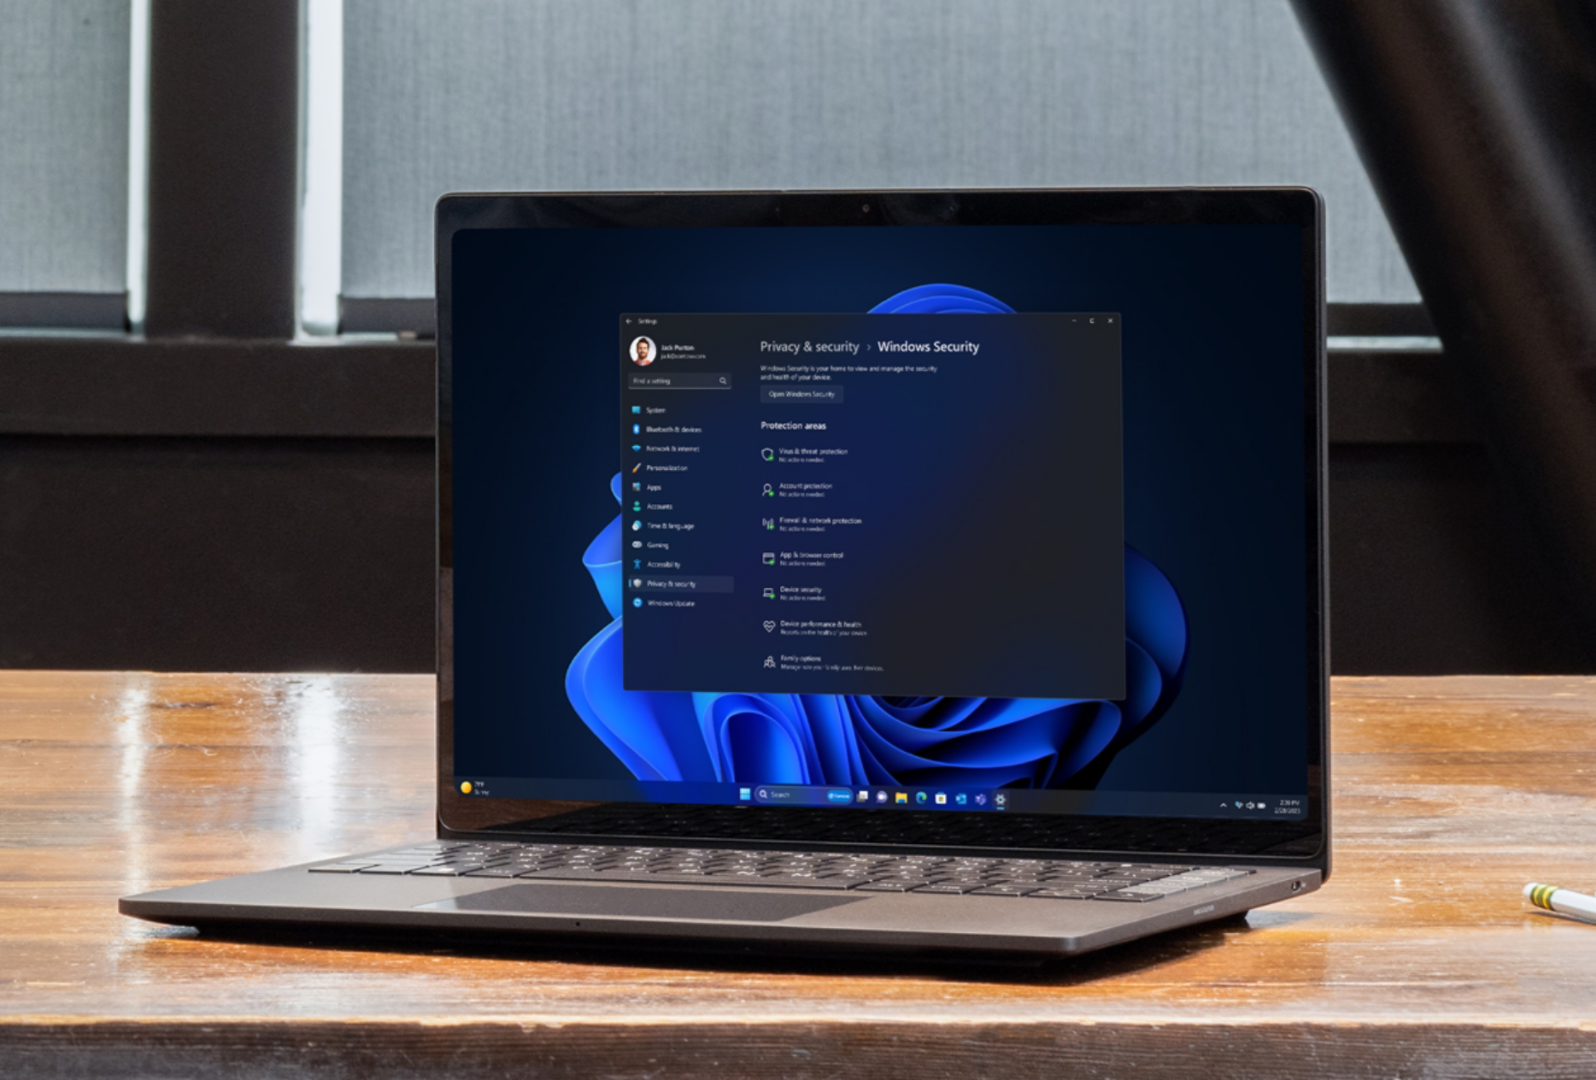  A photo of a Windows 11 Pro device featuring TPM 2.0 security functionality